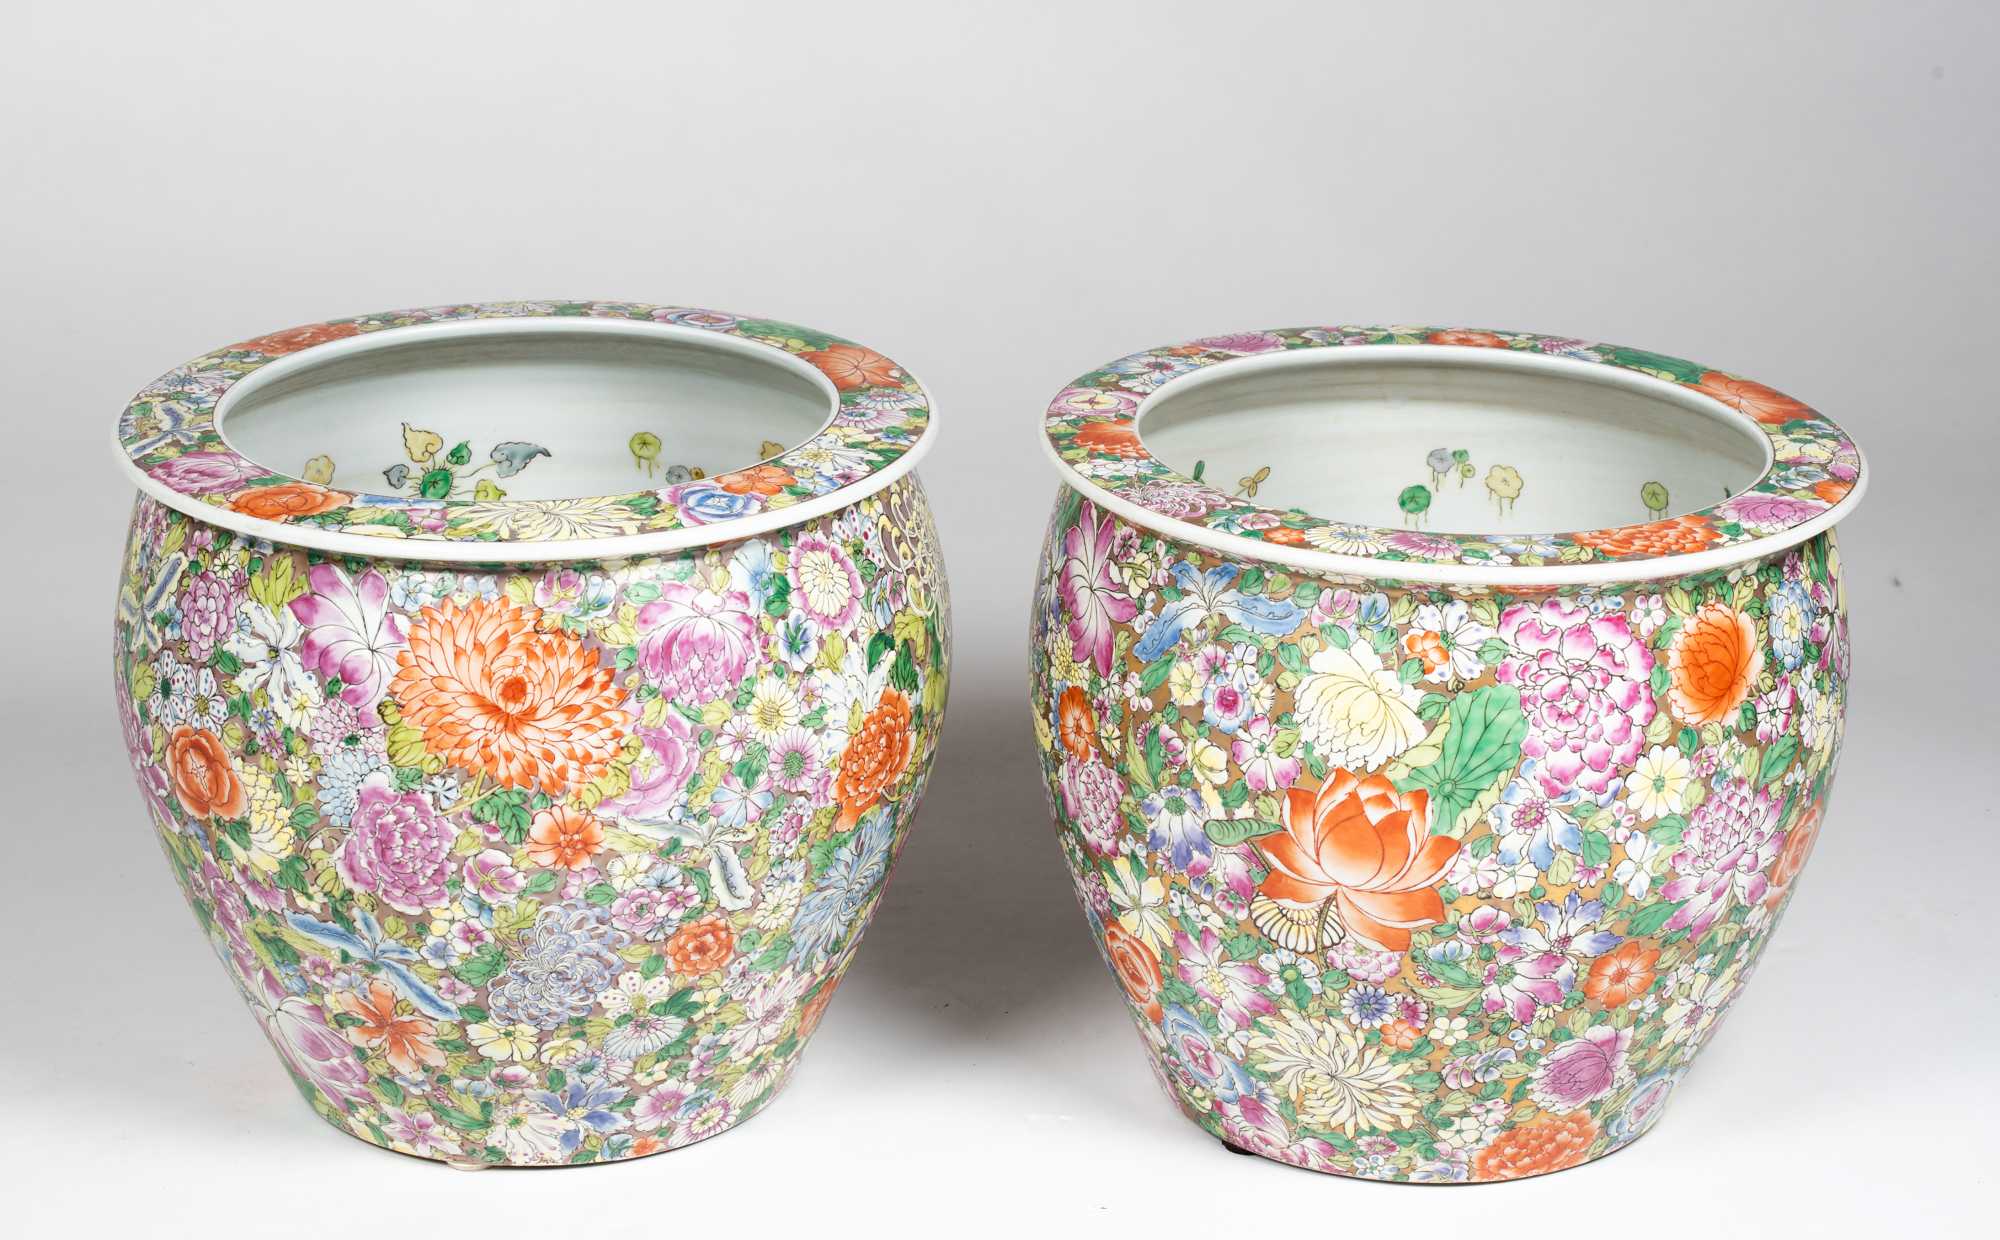 Pair of Chinese Porcelain Fishbowl Planters